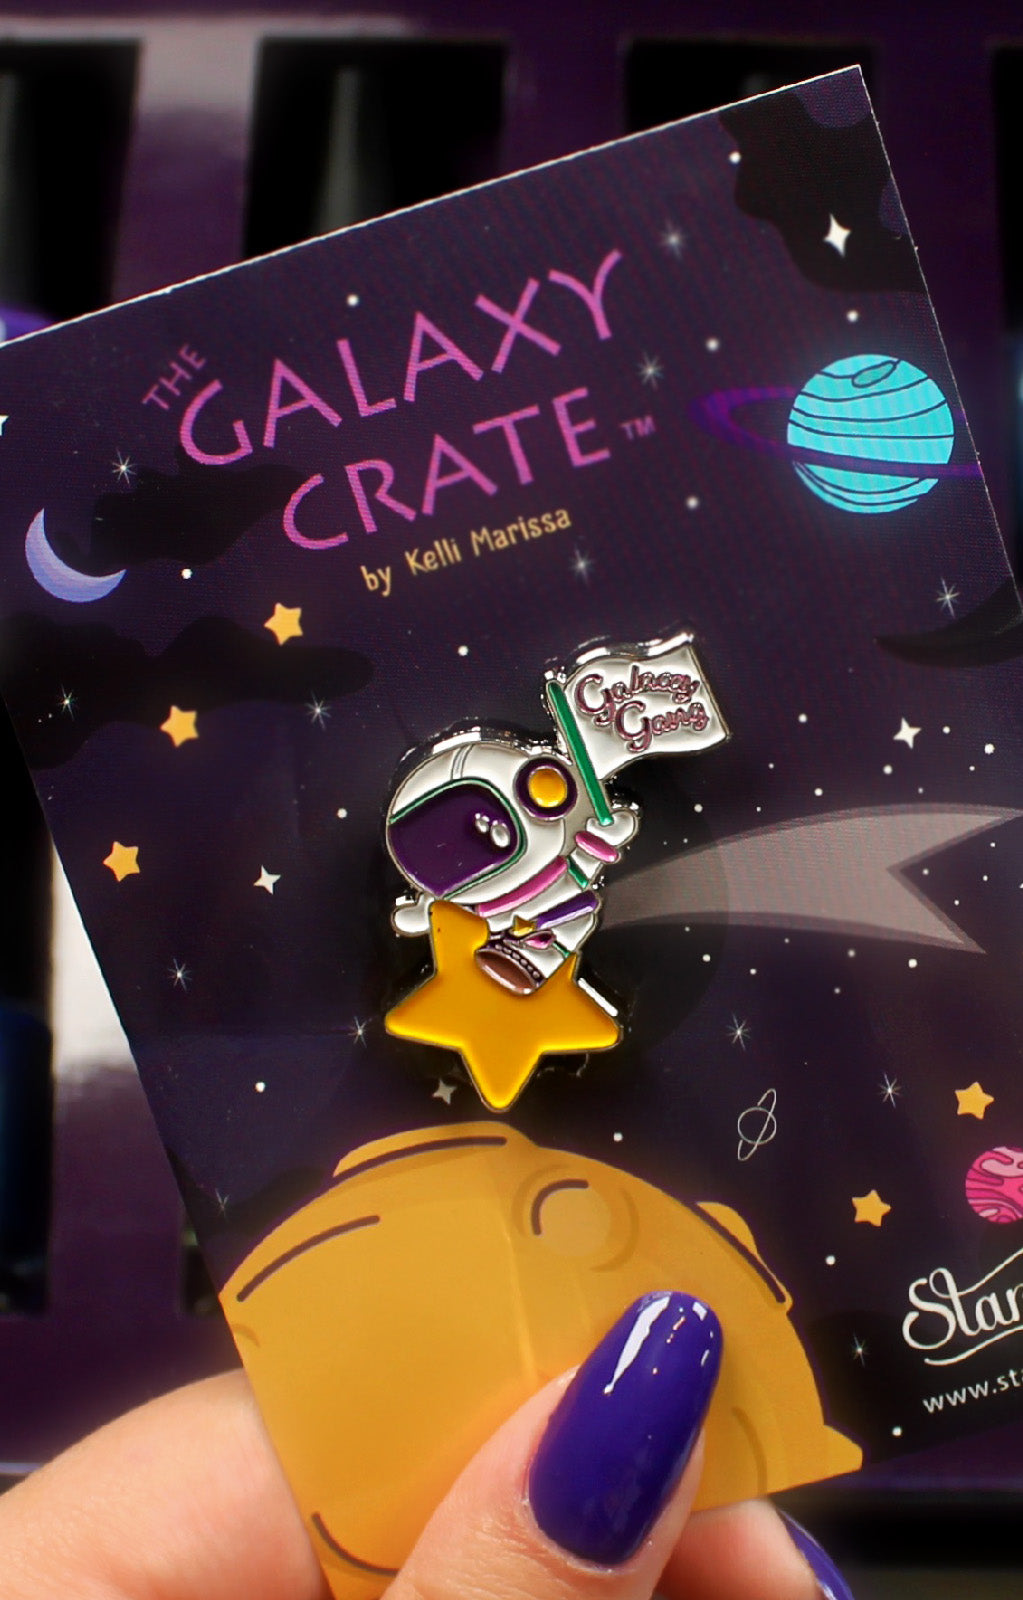 The Galaxy Crate™ Gift Set